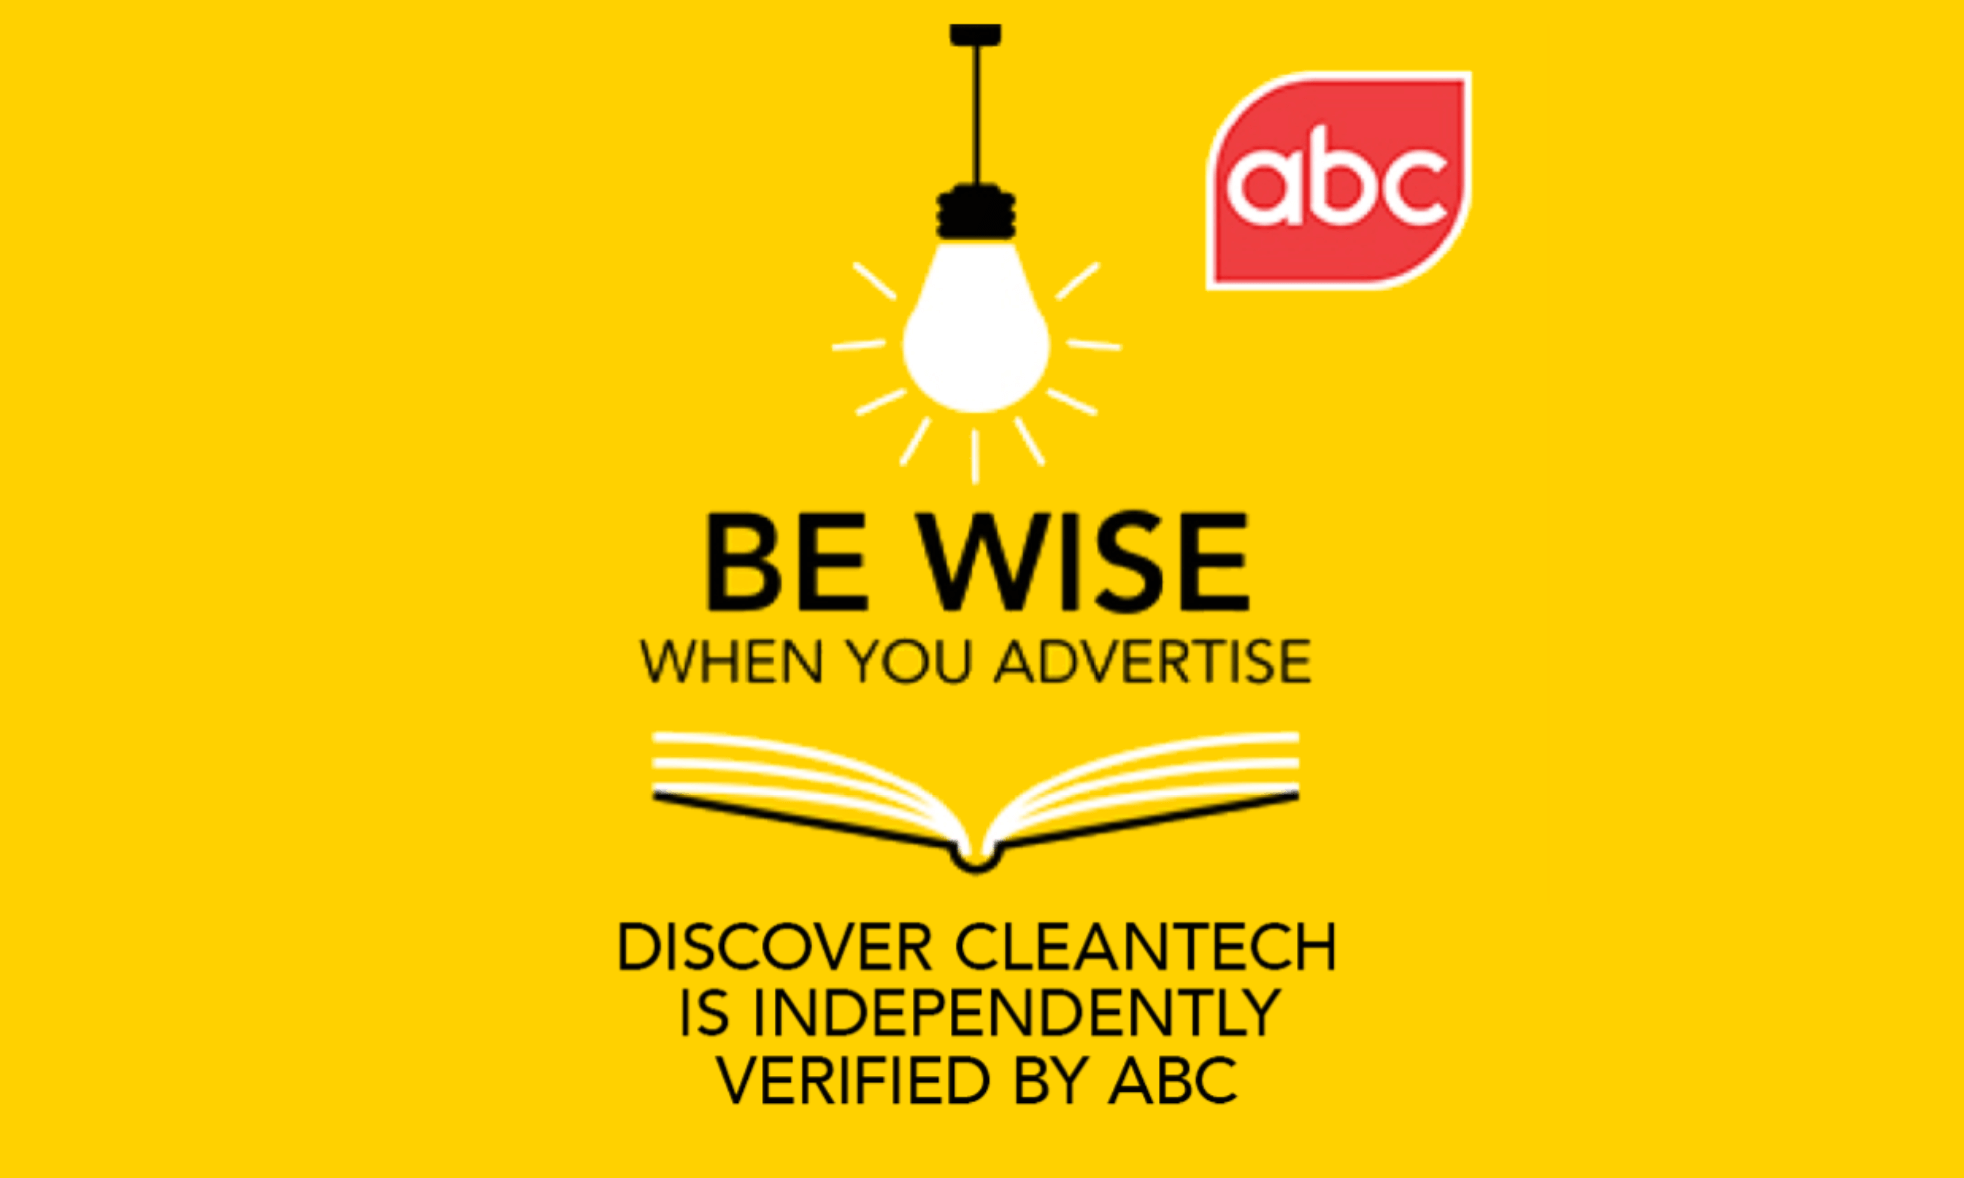 Be wise. ABC